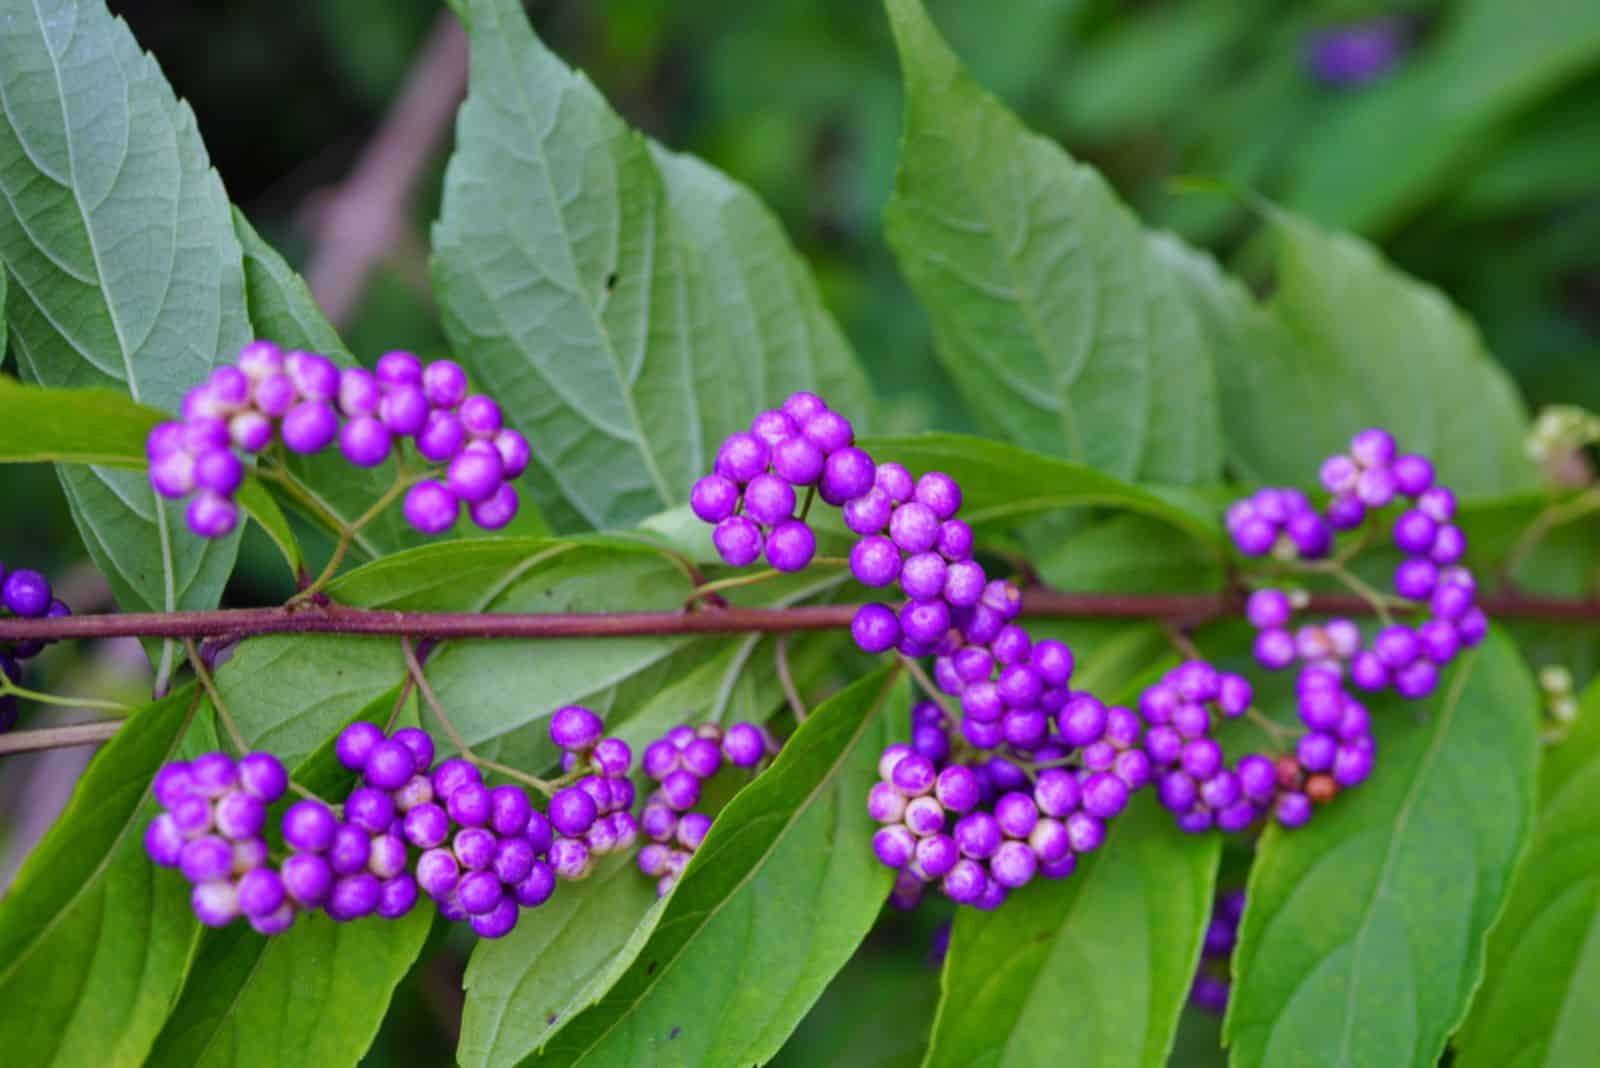 Purple berries of the Beautyberry plant